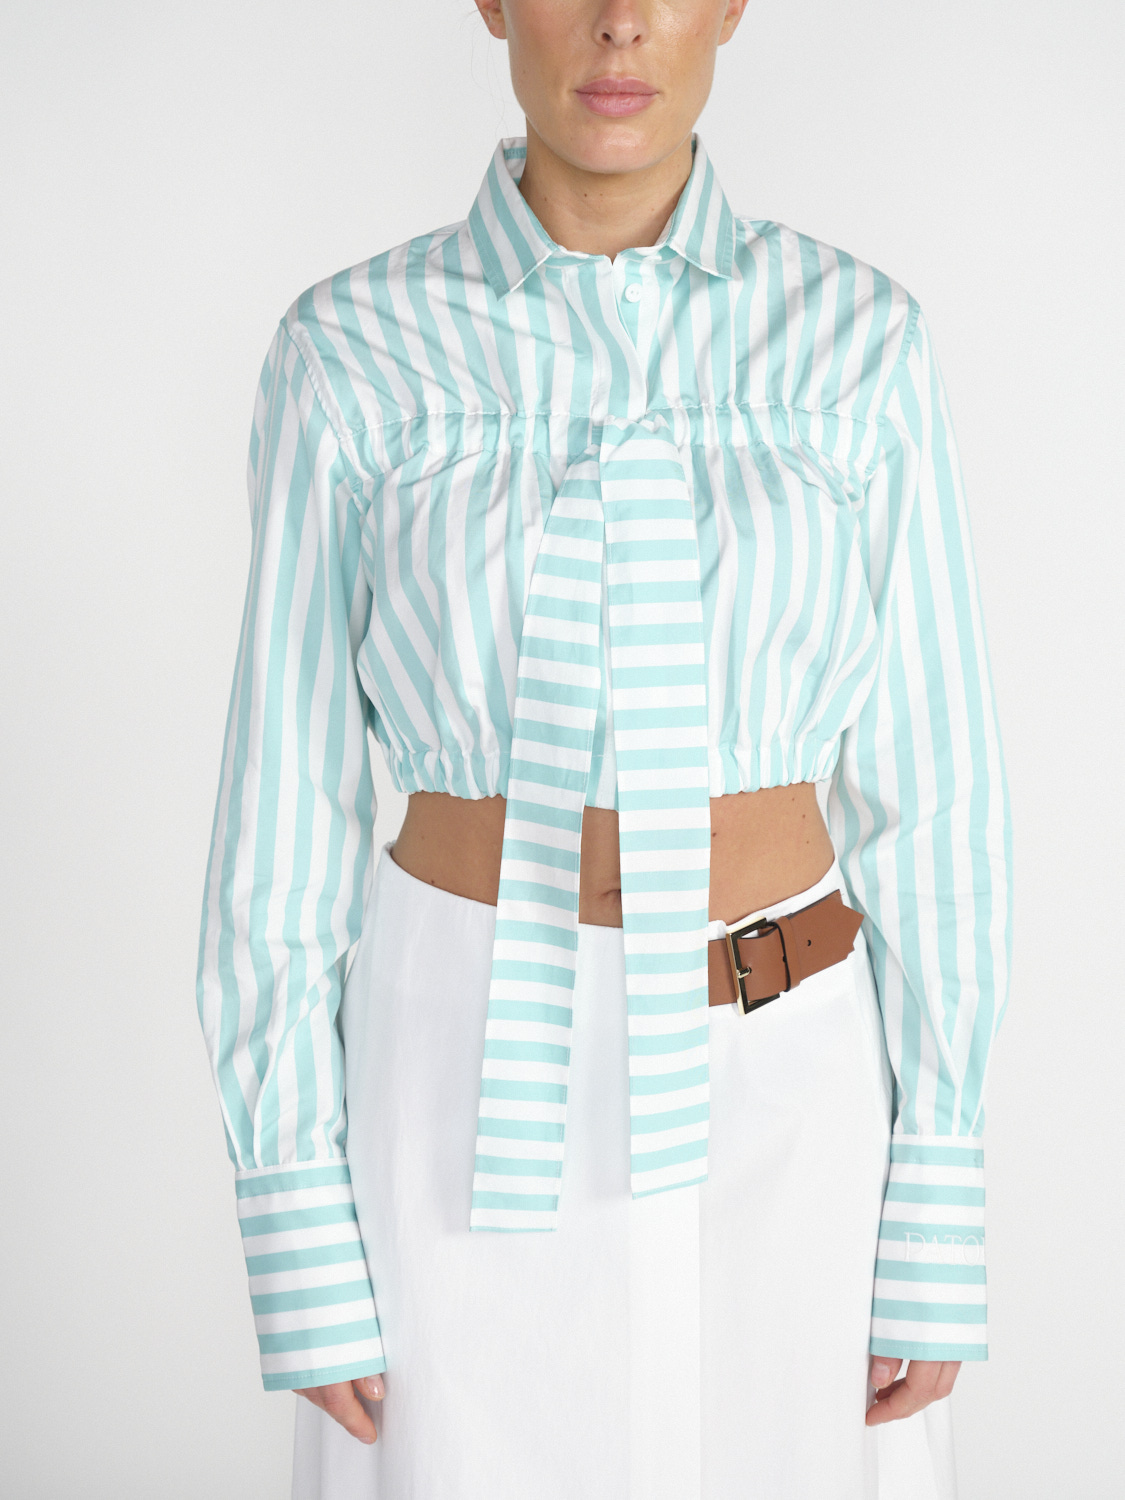 Patou Cropped bow shirt – Gecroppte Baumwoll-Bluse mint 38